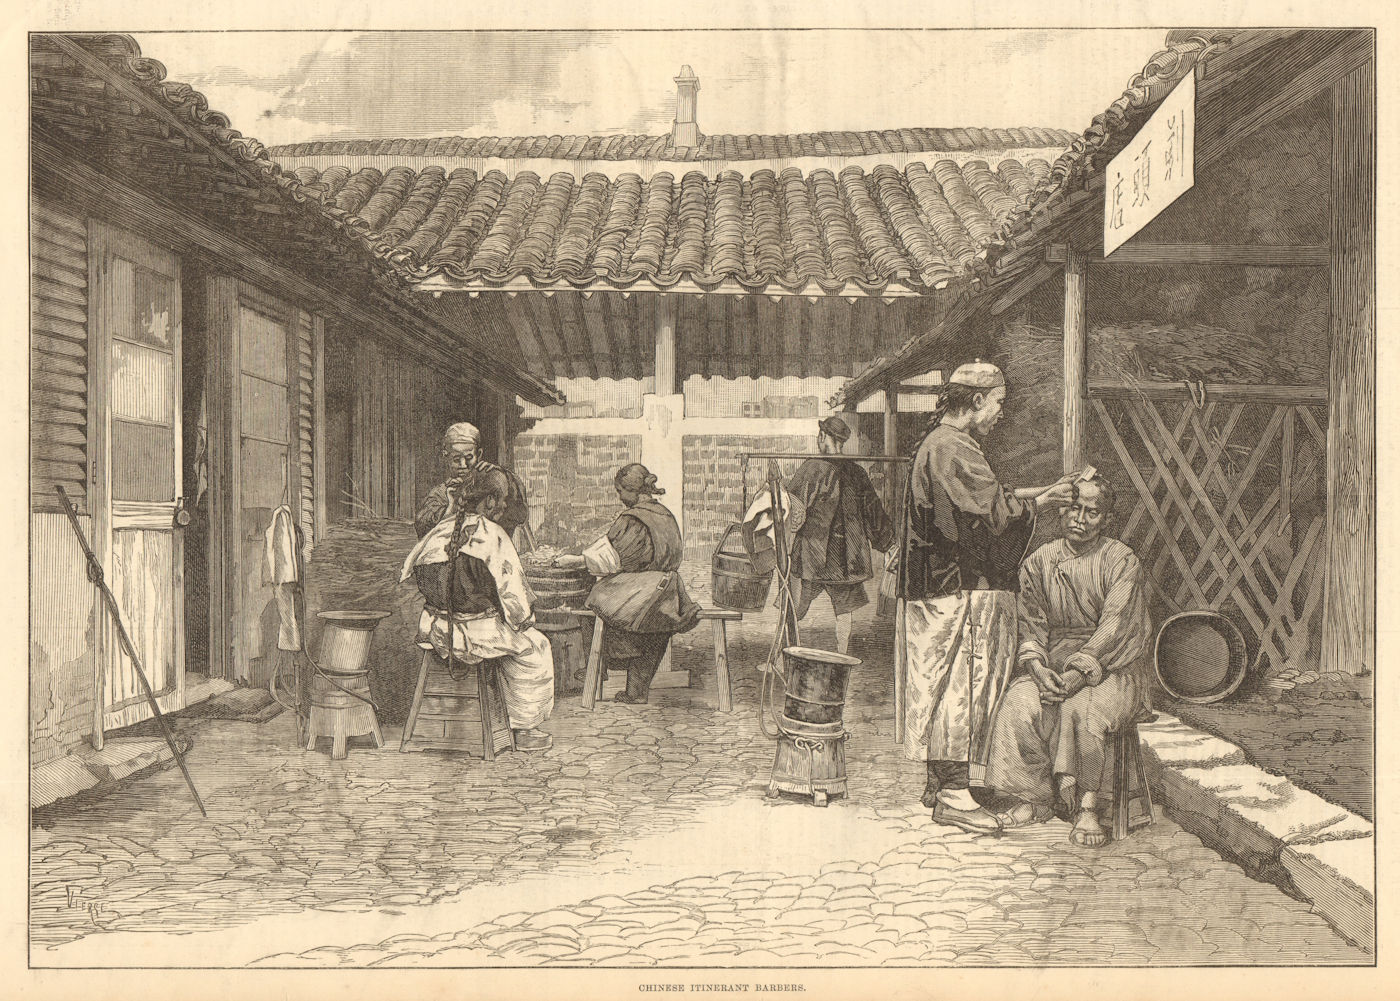 Associate Product Chinese itinerant barbers. Trades 1876 old antique vintage print picture